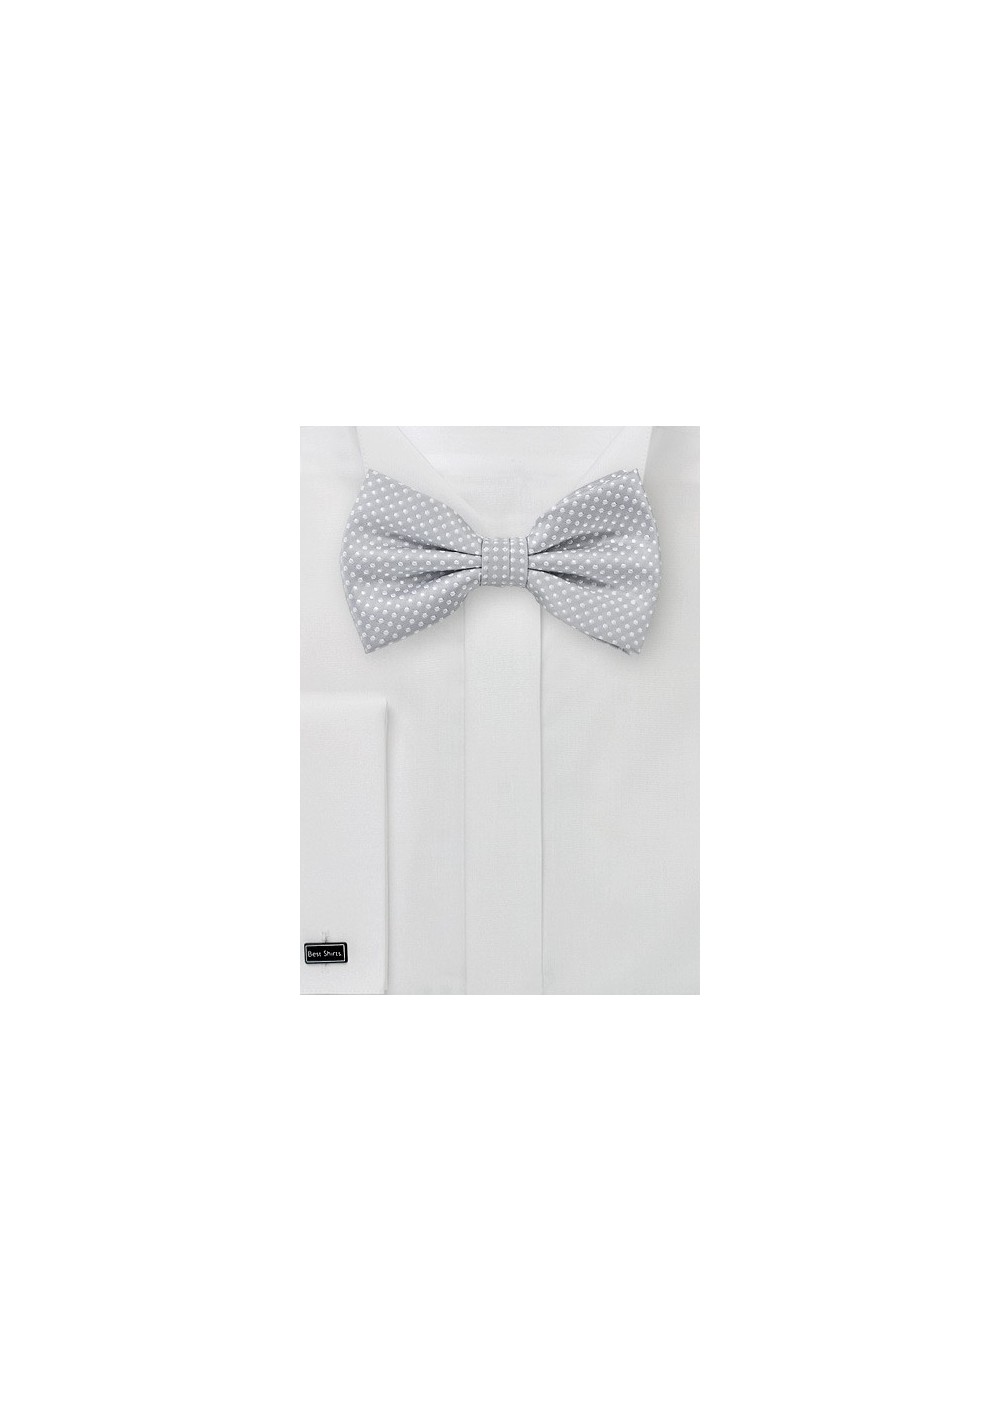 Pin Dot Bow Tie in Silver and White